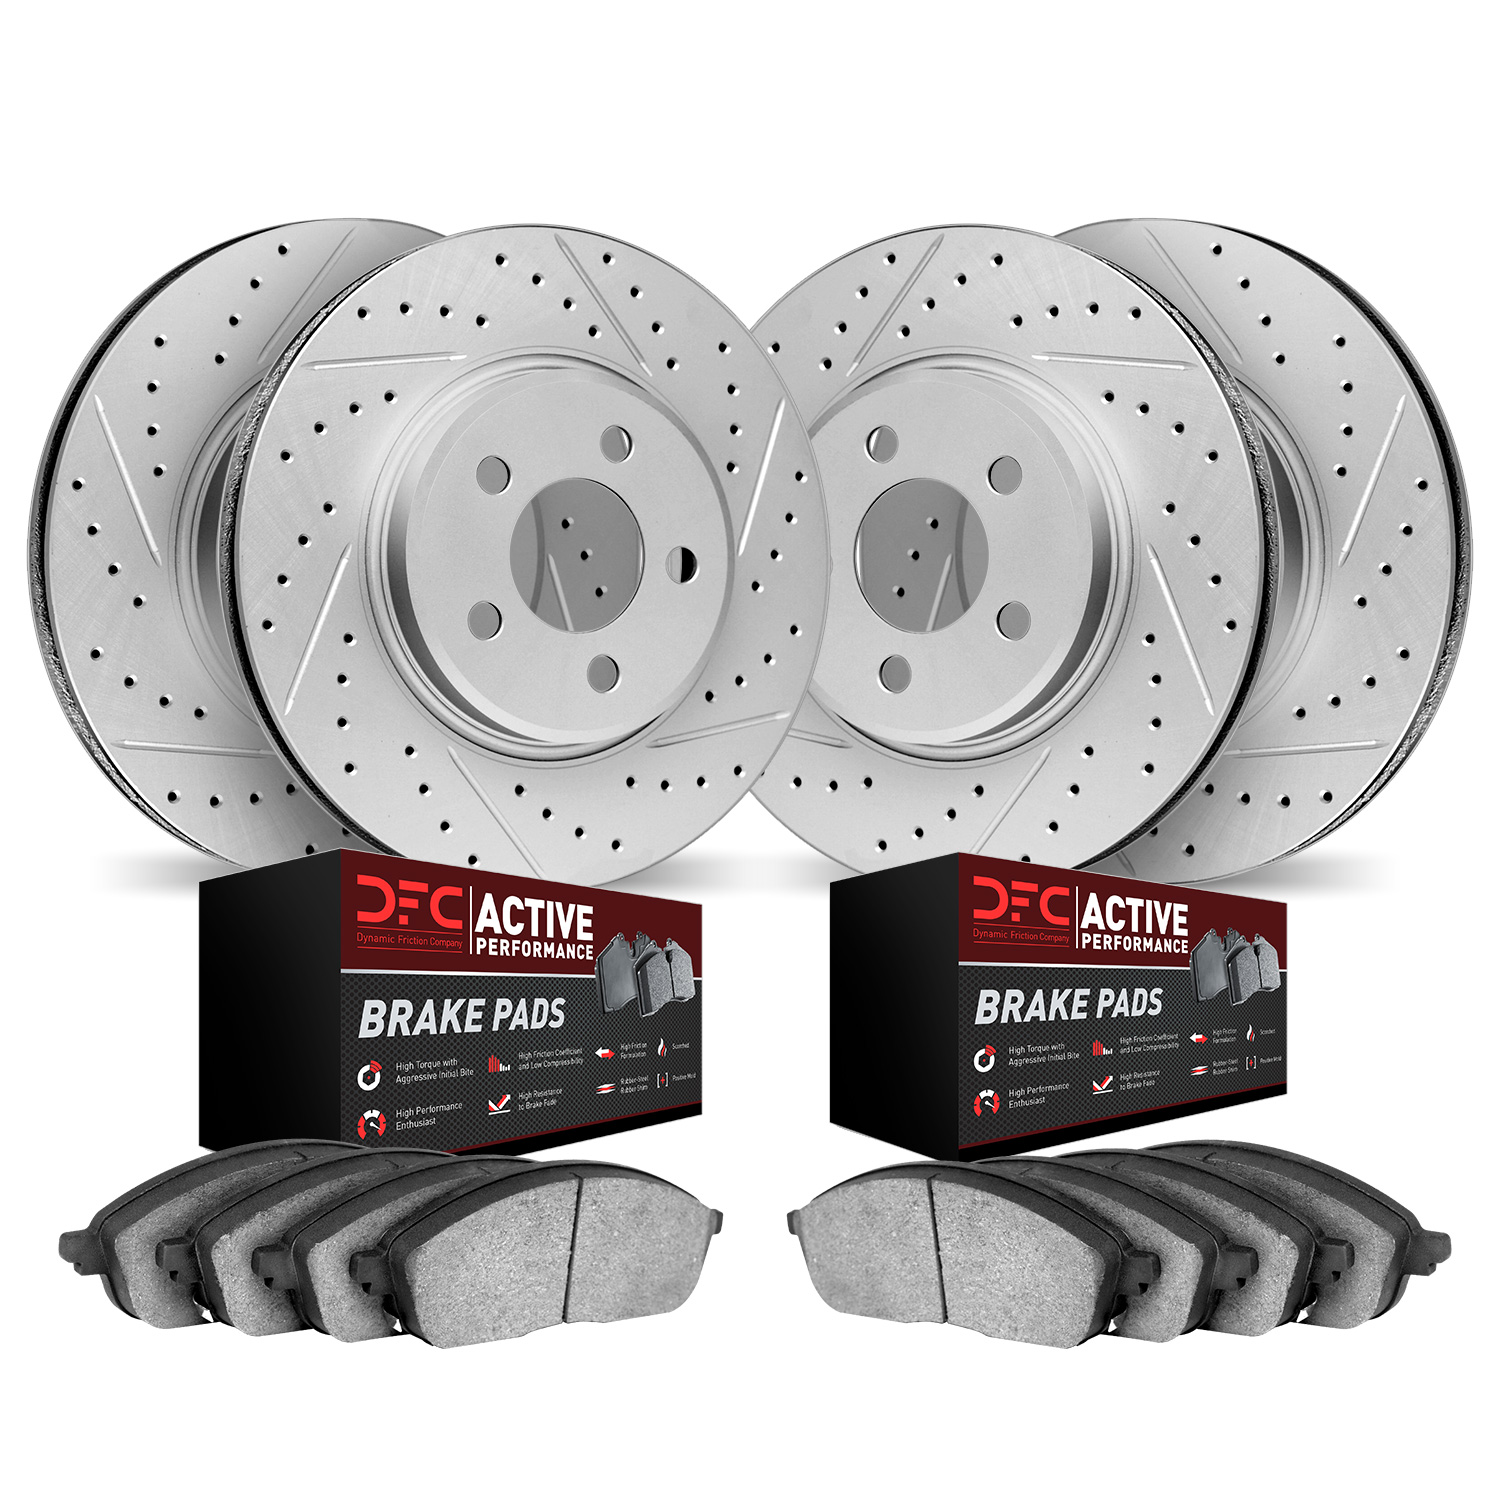 2704-47016 Geoperformance Drilled/Slotted Brake Rotors with Active Performance Pads Kit, 2014-2019 GM, Position: Front and Rear